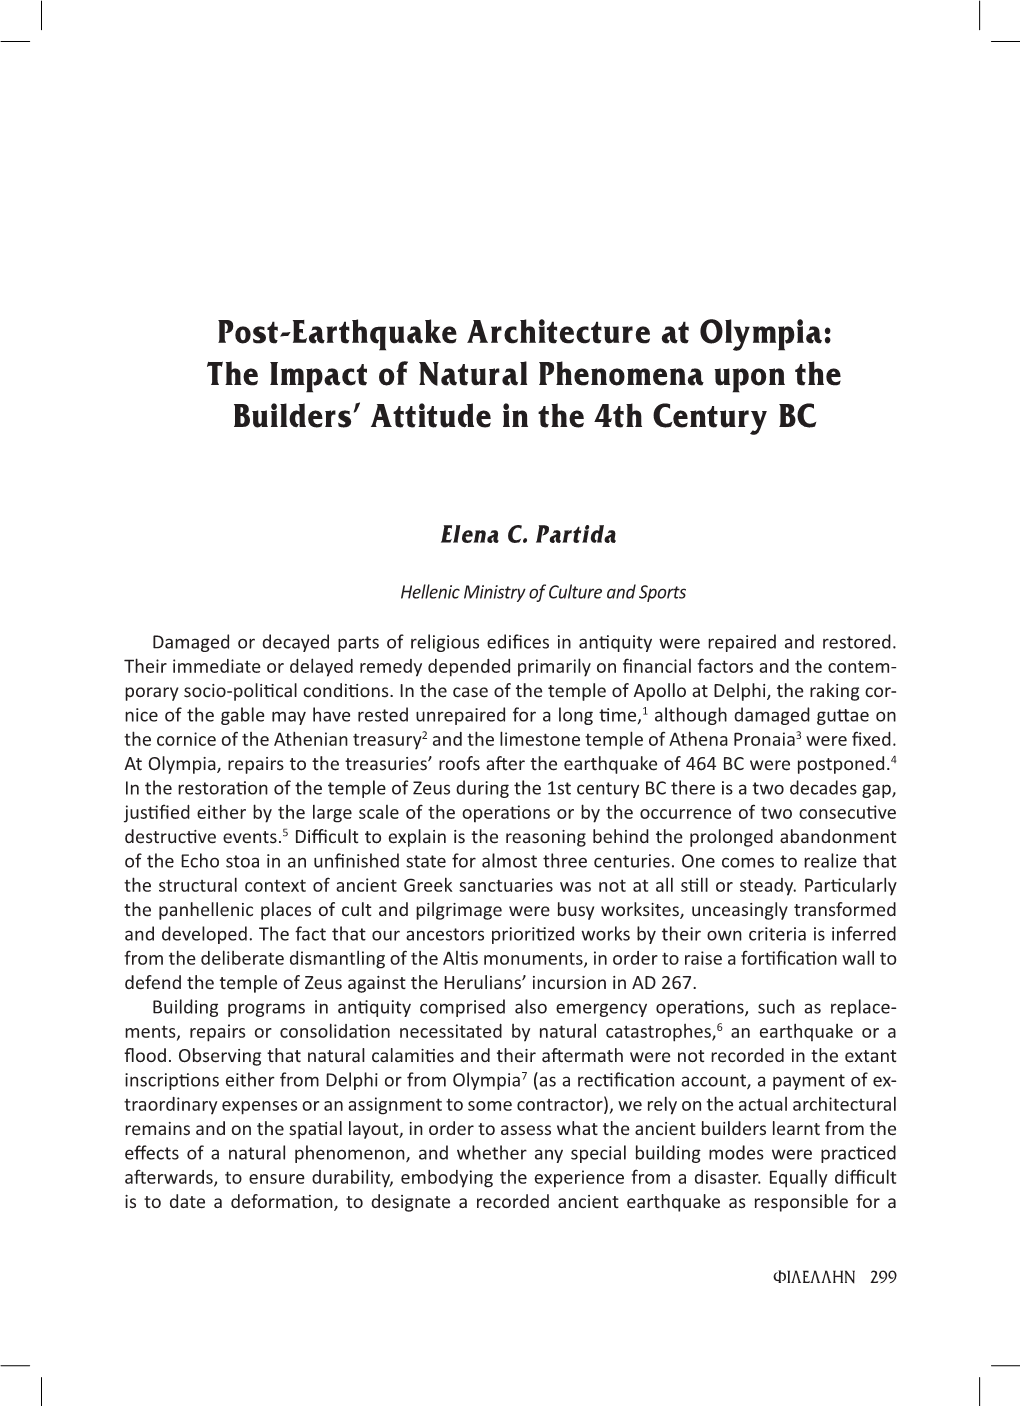 Post-Earthquake Architecture at Olympia: the Impact of Natural Phenomena Upon the Builders’ Attitude in the 4Th Century BC